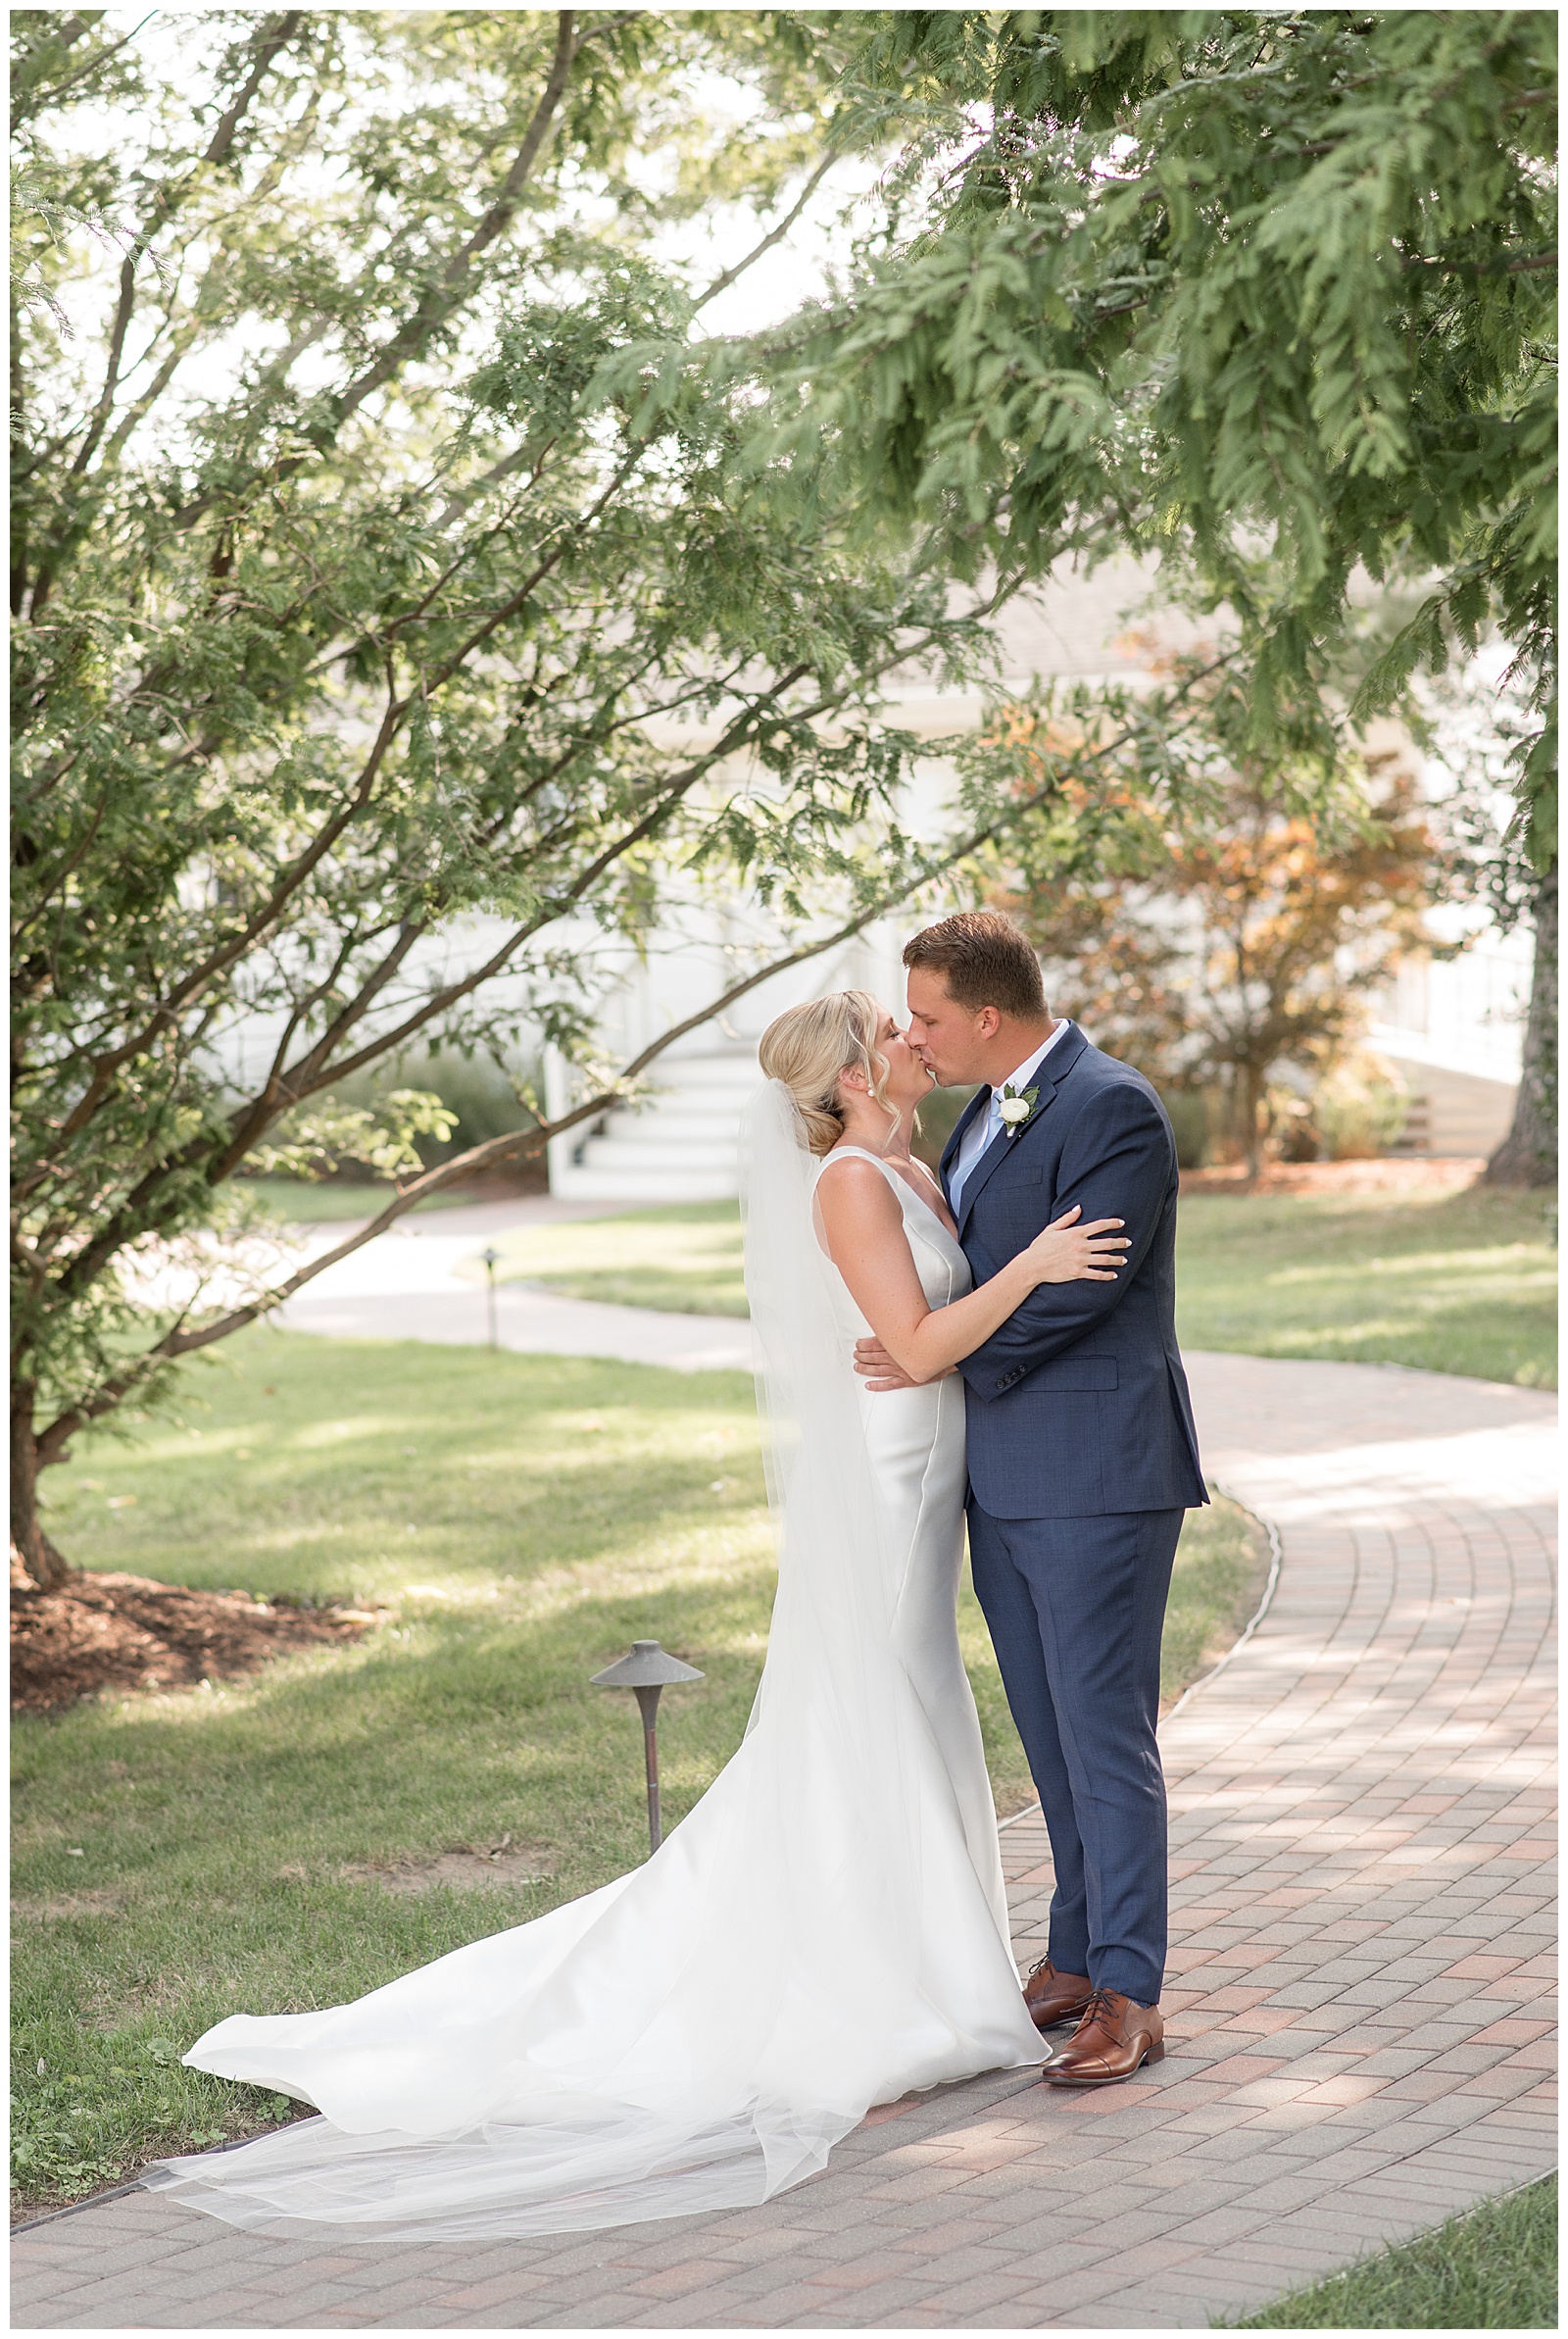 bride and groom share a kiss after their first look along paved pathway on sunny day in maryland